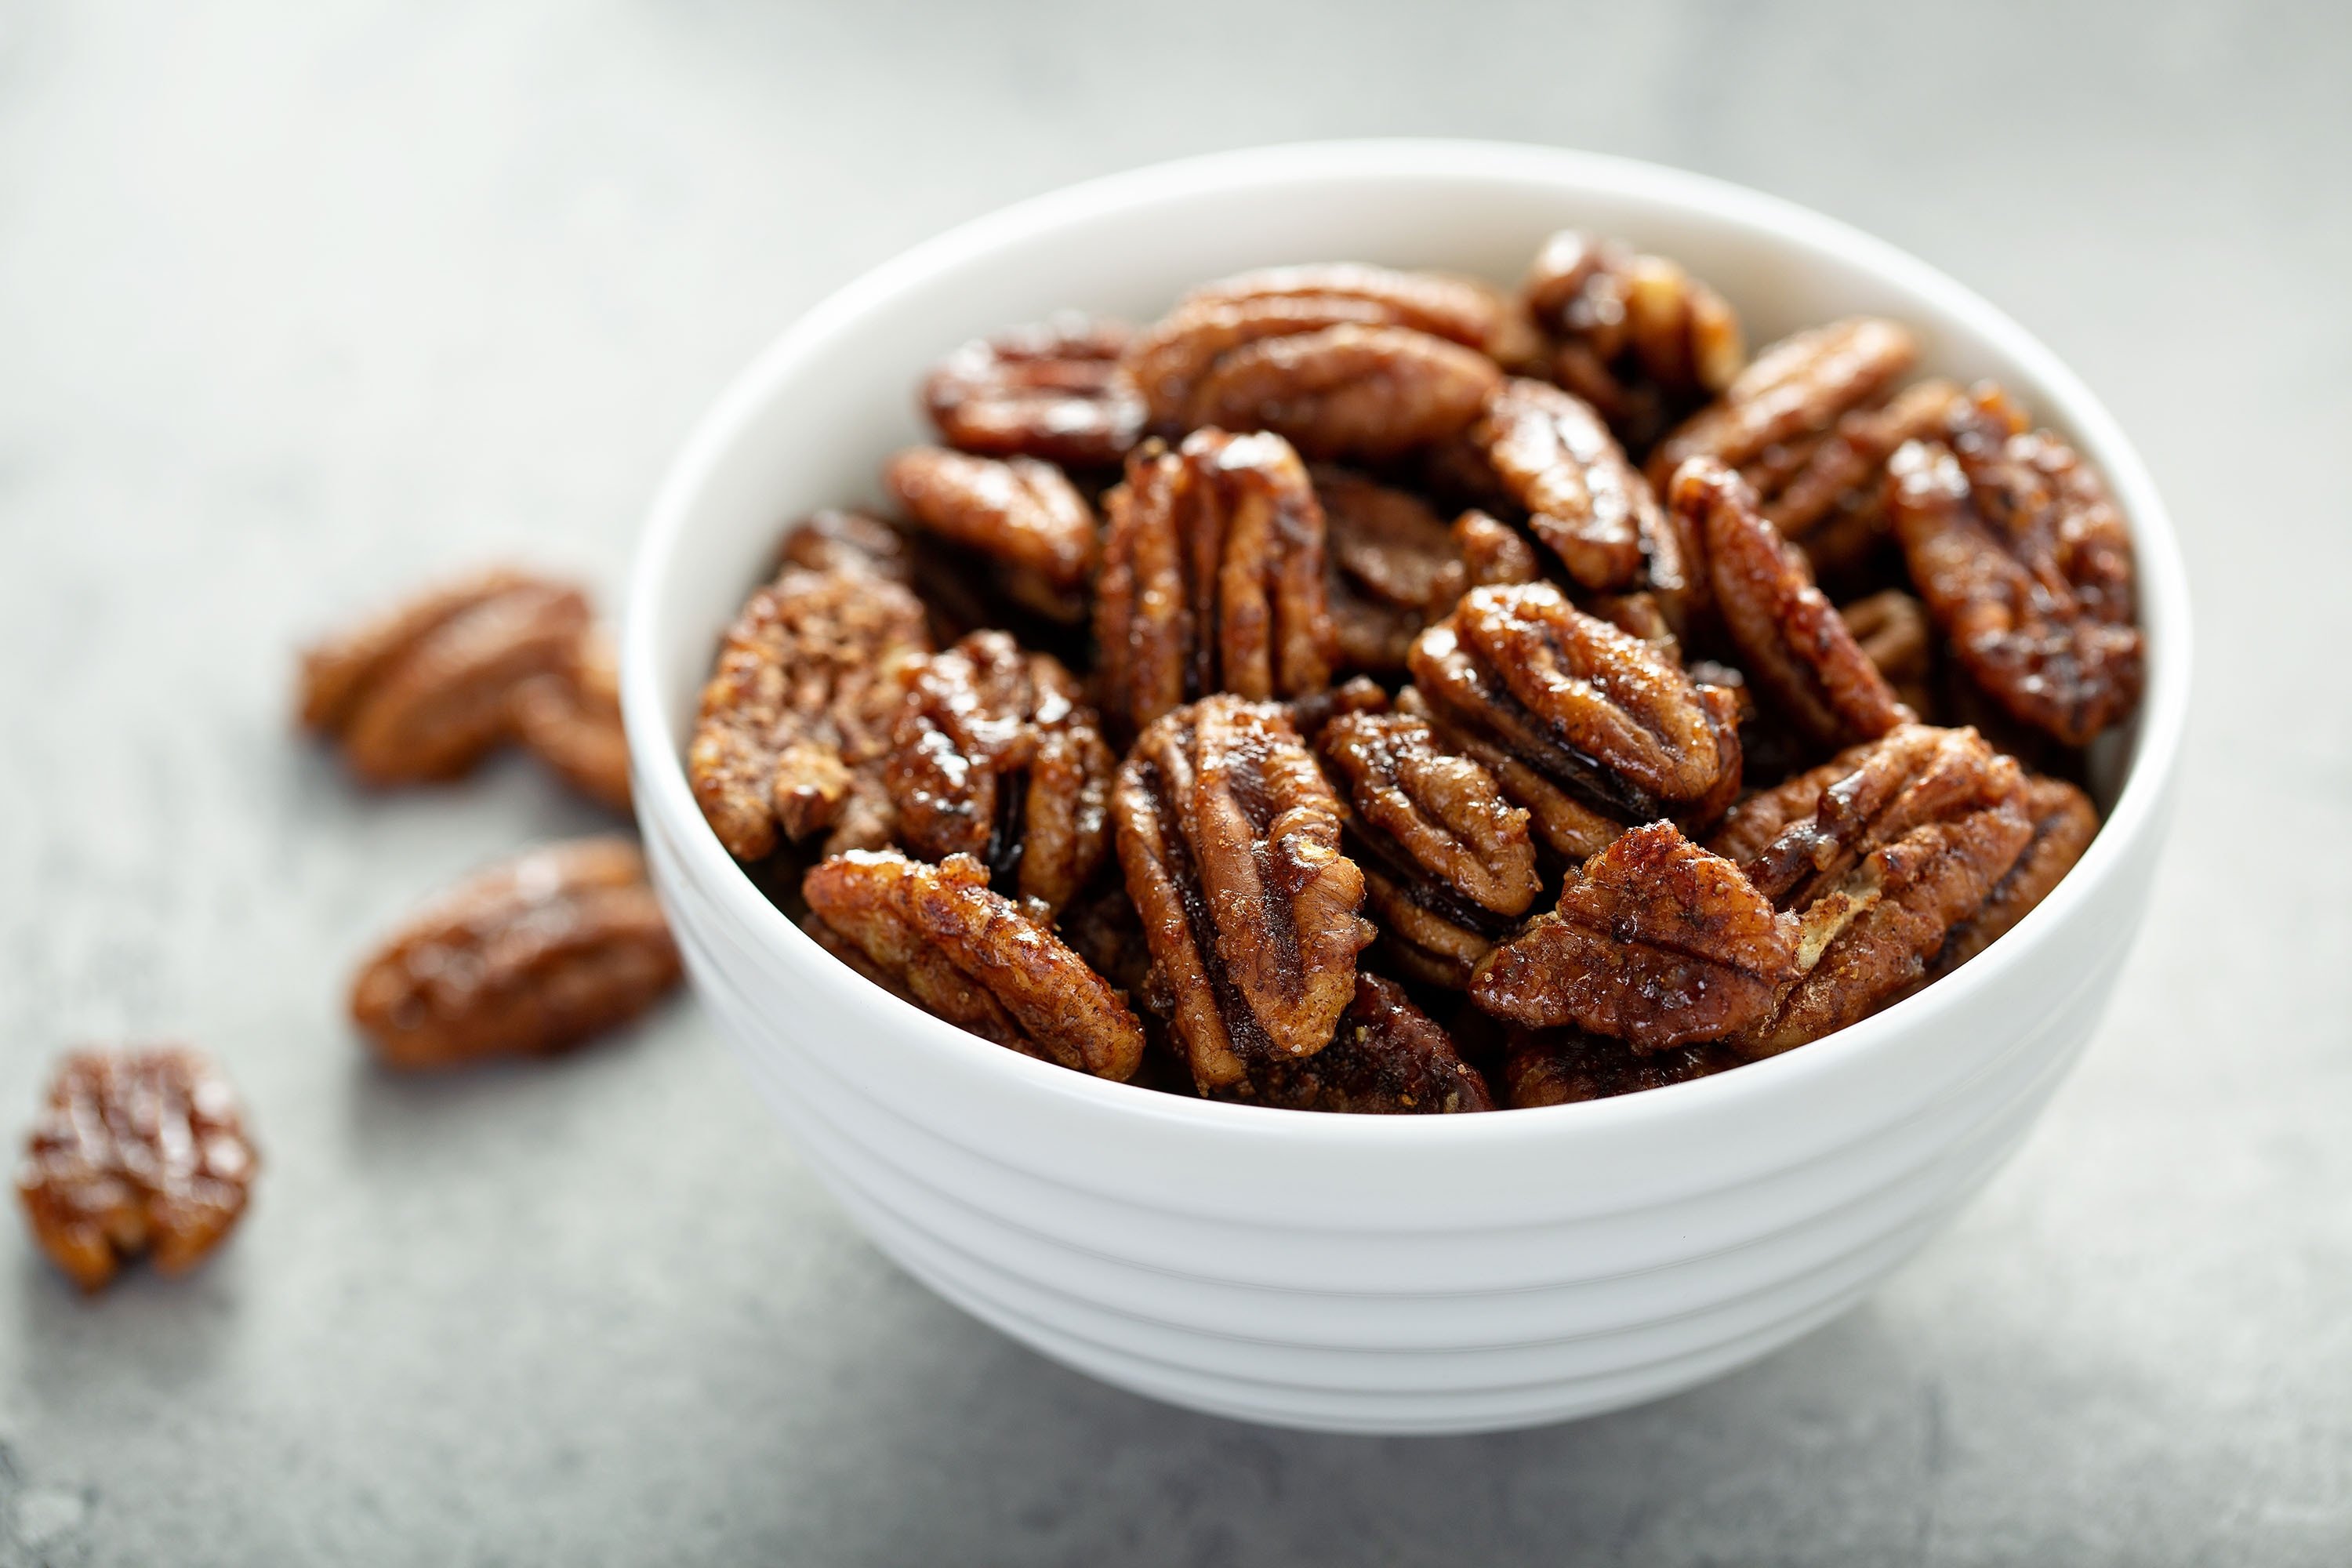 Caramelized candied walnuts in a bowl. (Shutterstock Photo)